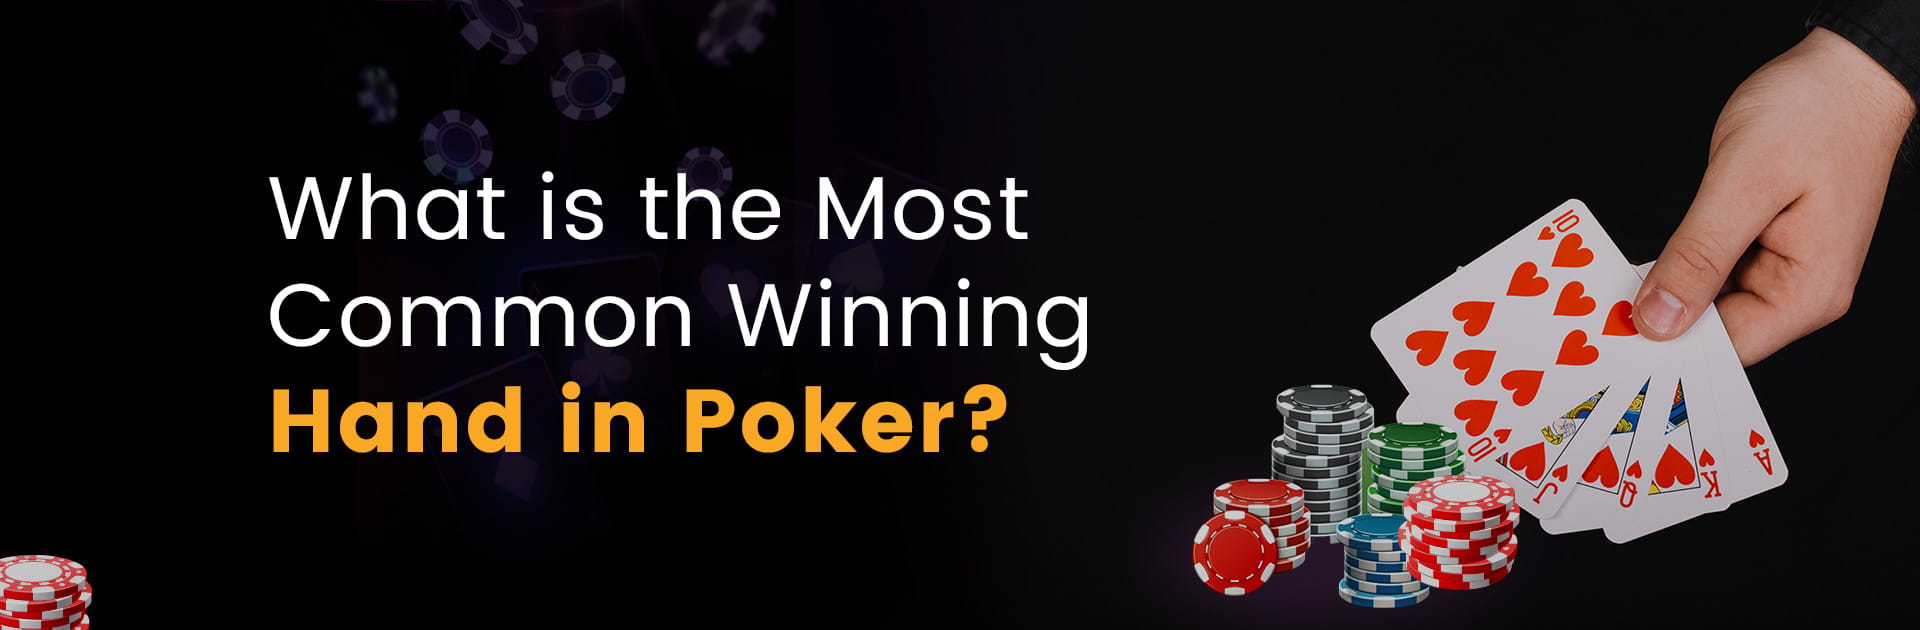 What is the Most Common Winning Hand in Poker?